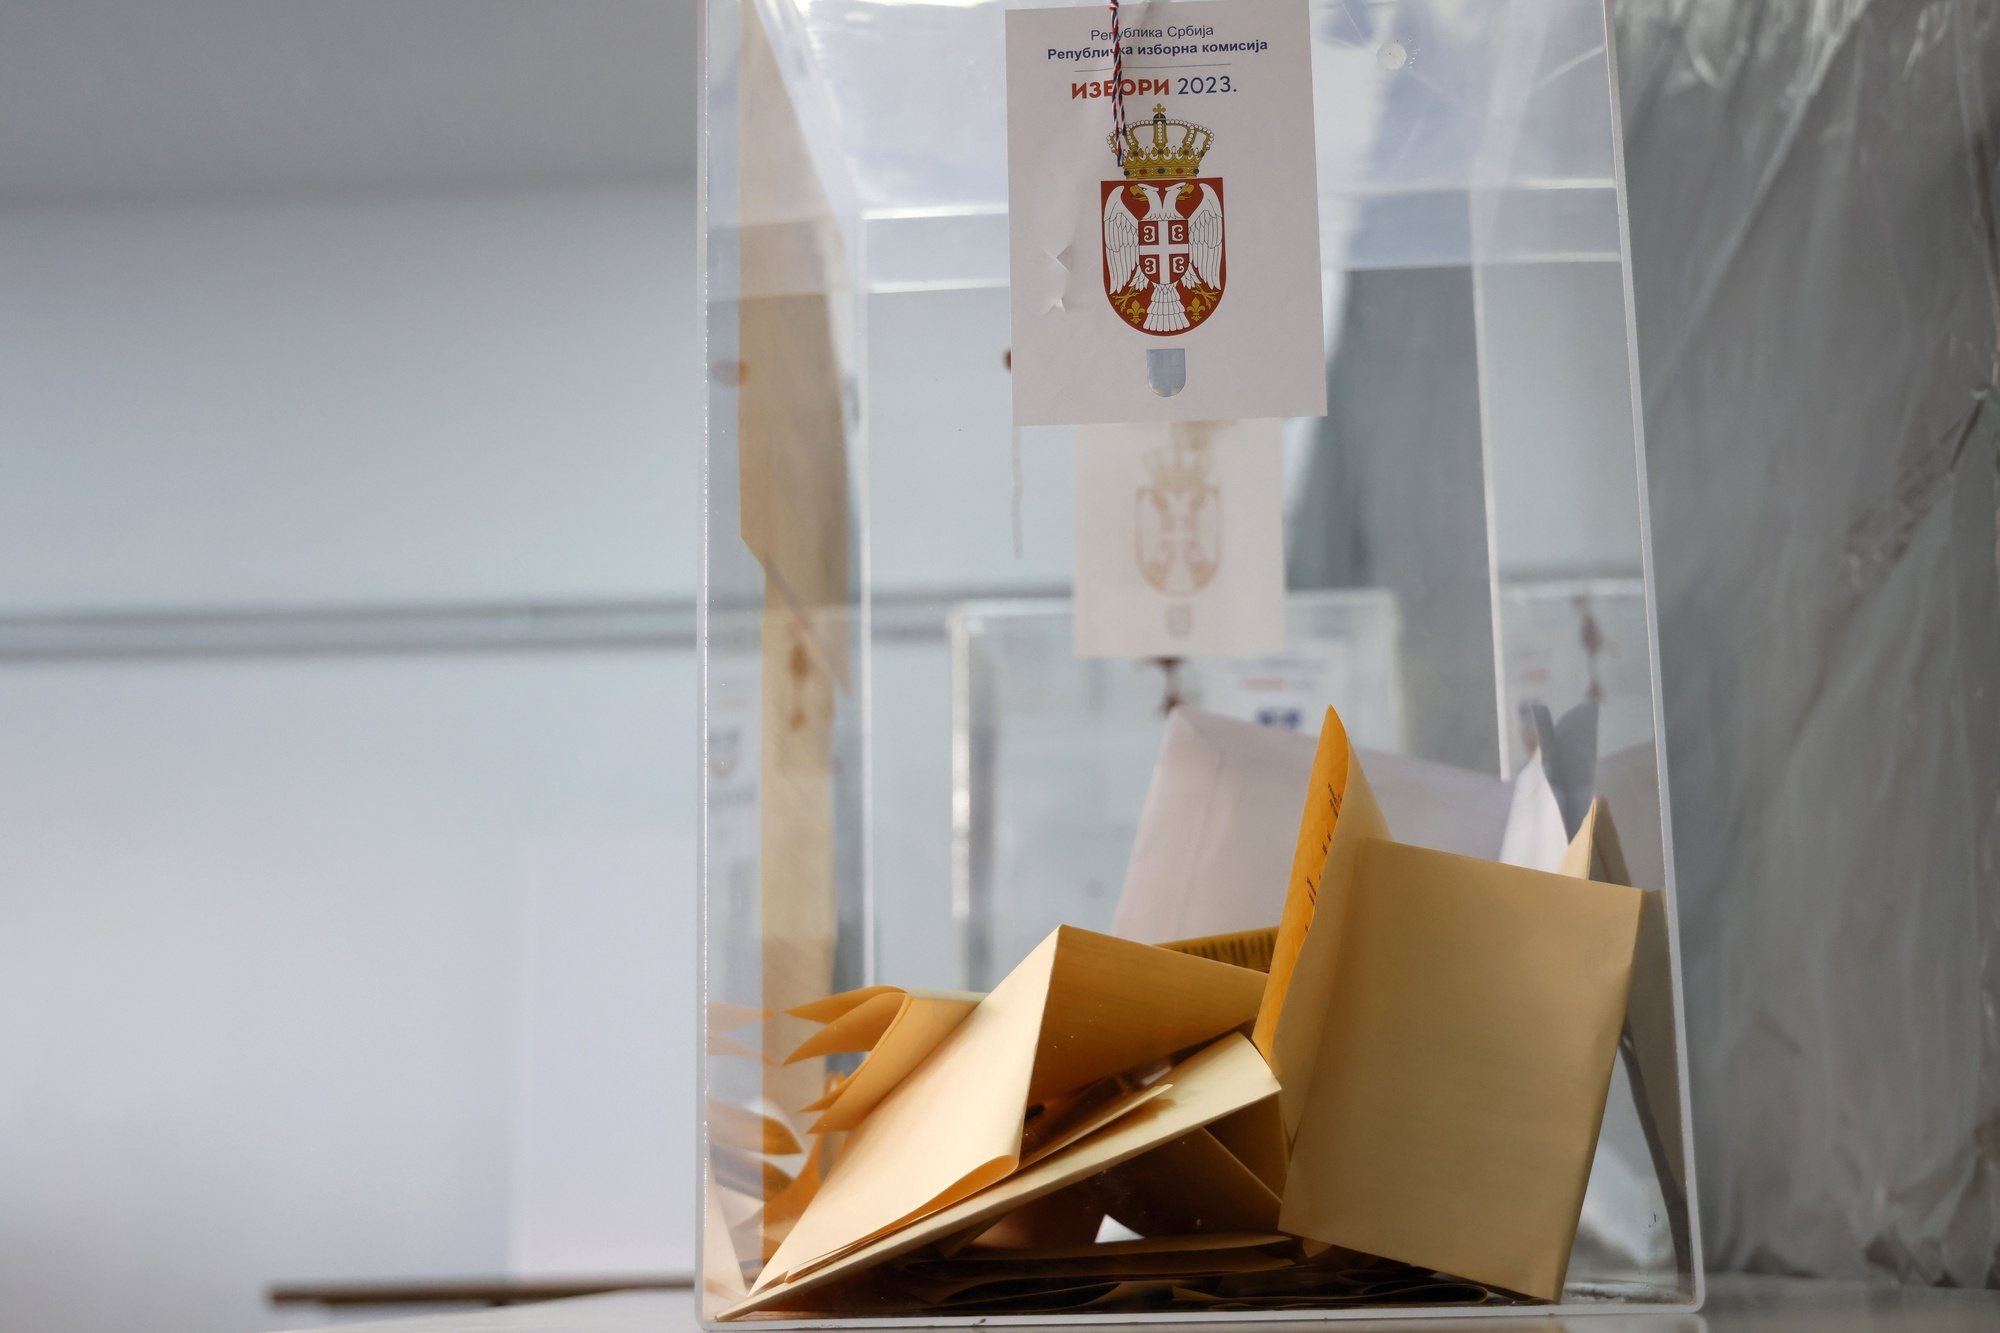 epa11033677 Ballots are seen inside a ballot box during the Parliamentary and local elections in Belgrade, Serbia, 17 December 2023. Voters in Serbia will elect a new parliament and local authorities in 64 municipalities on 17 December 2023.  EPA/MARKO DJOKOVIC